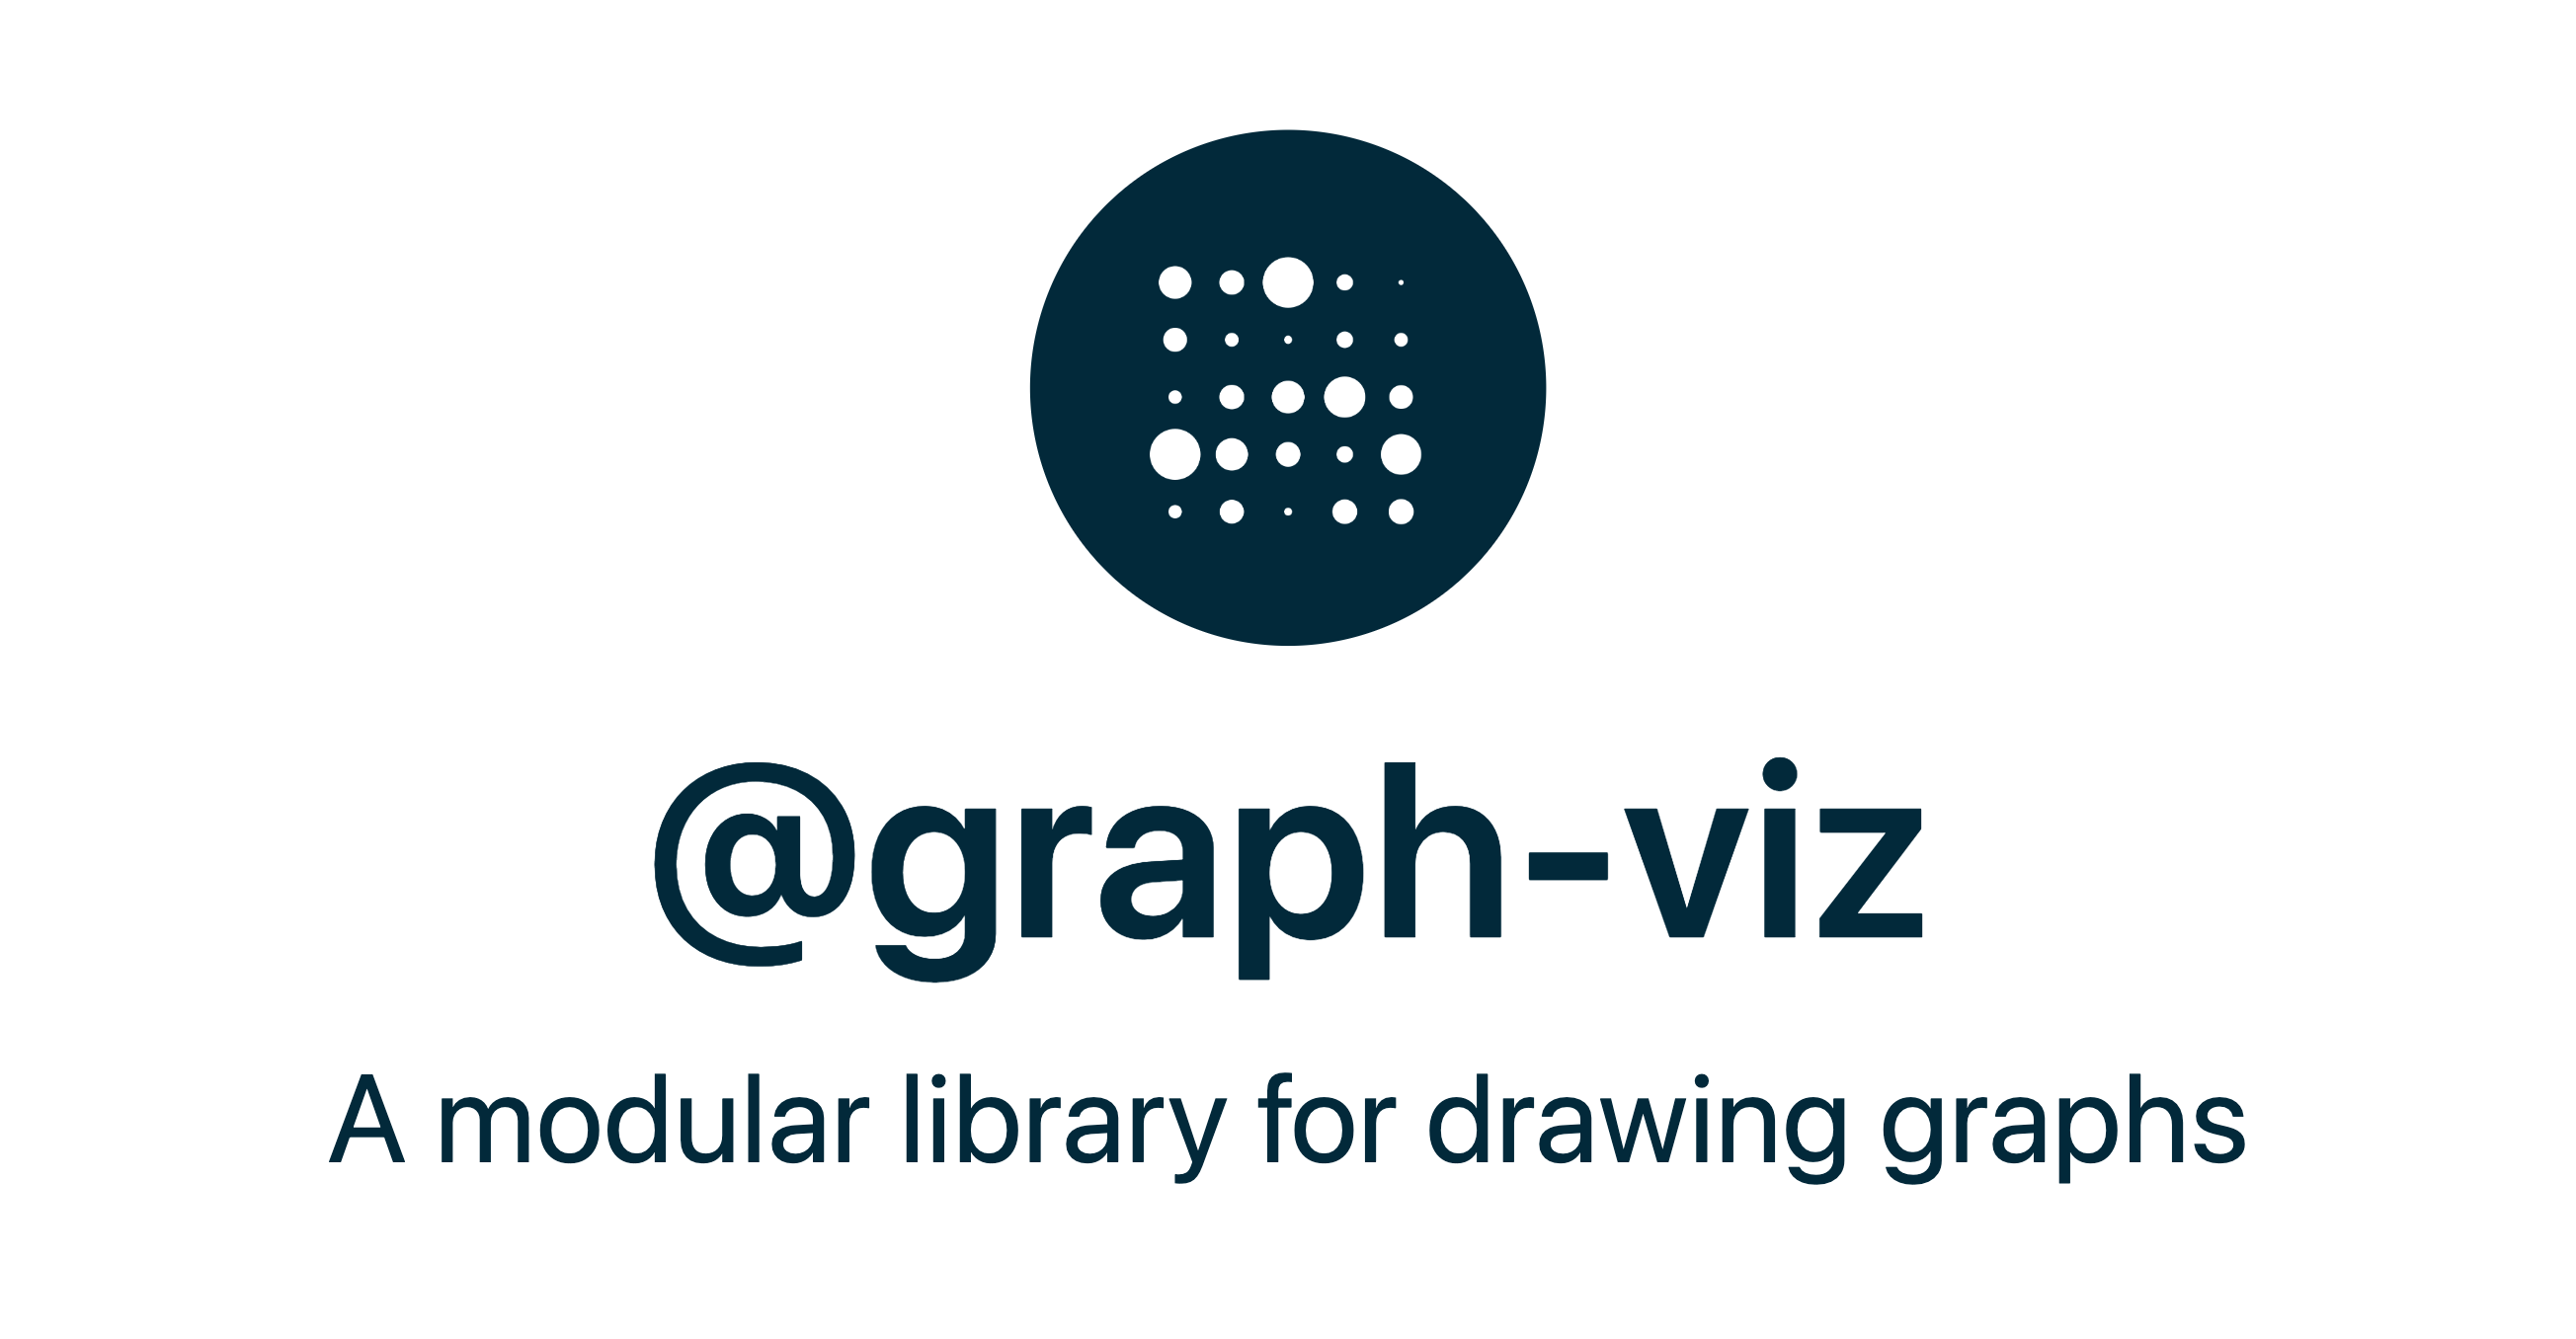 Cover Image for @graph-viz library